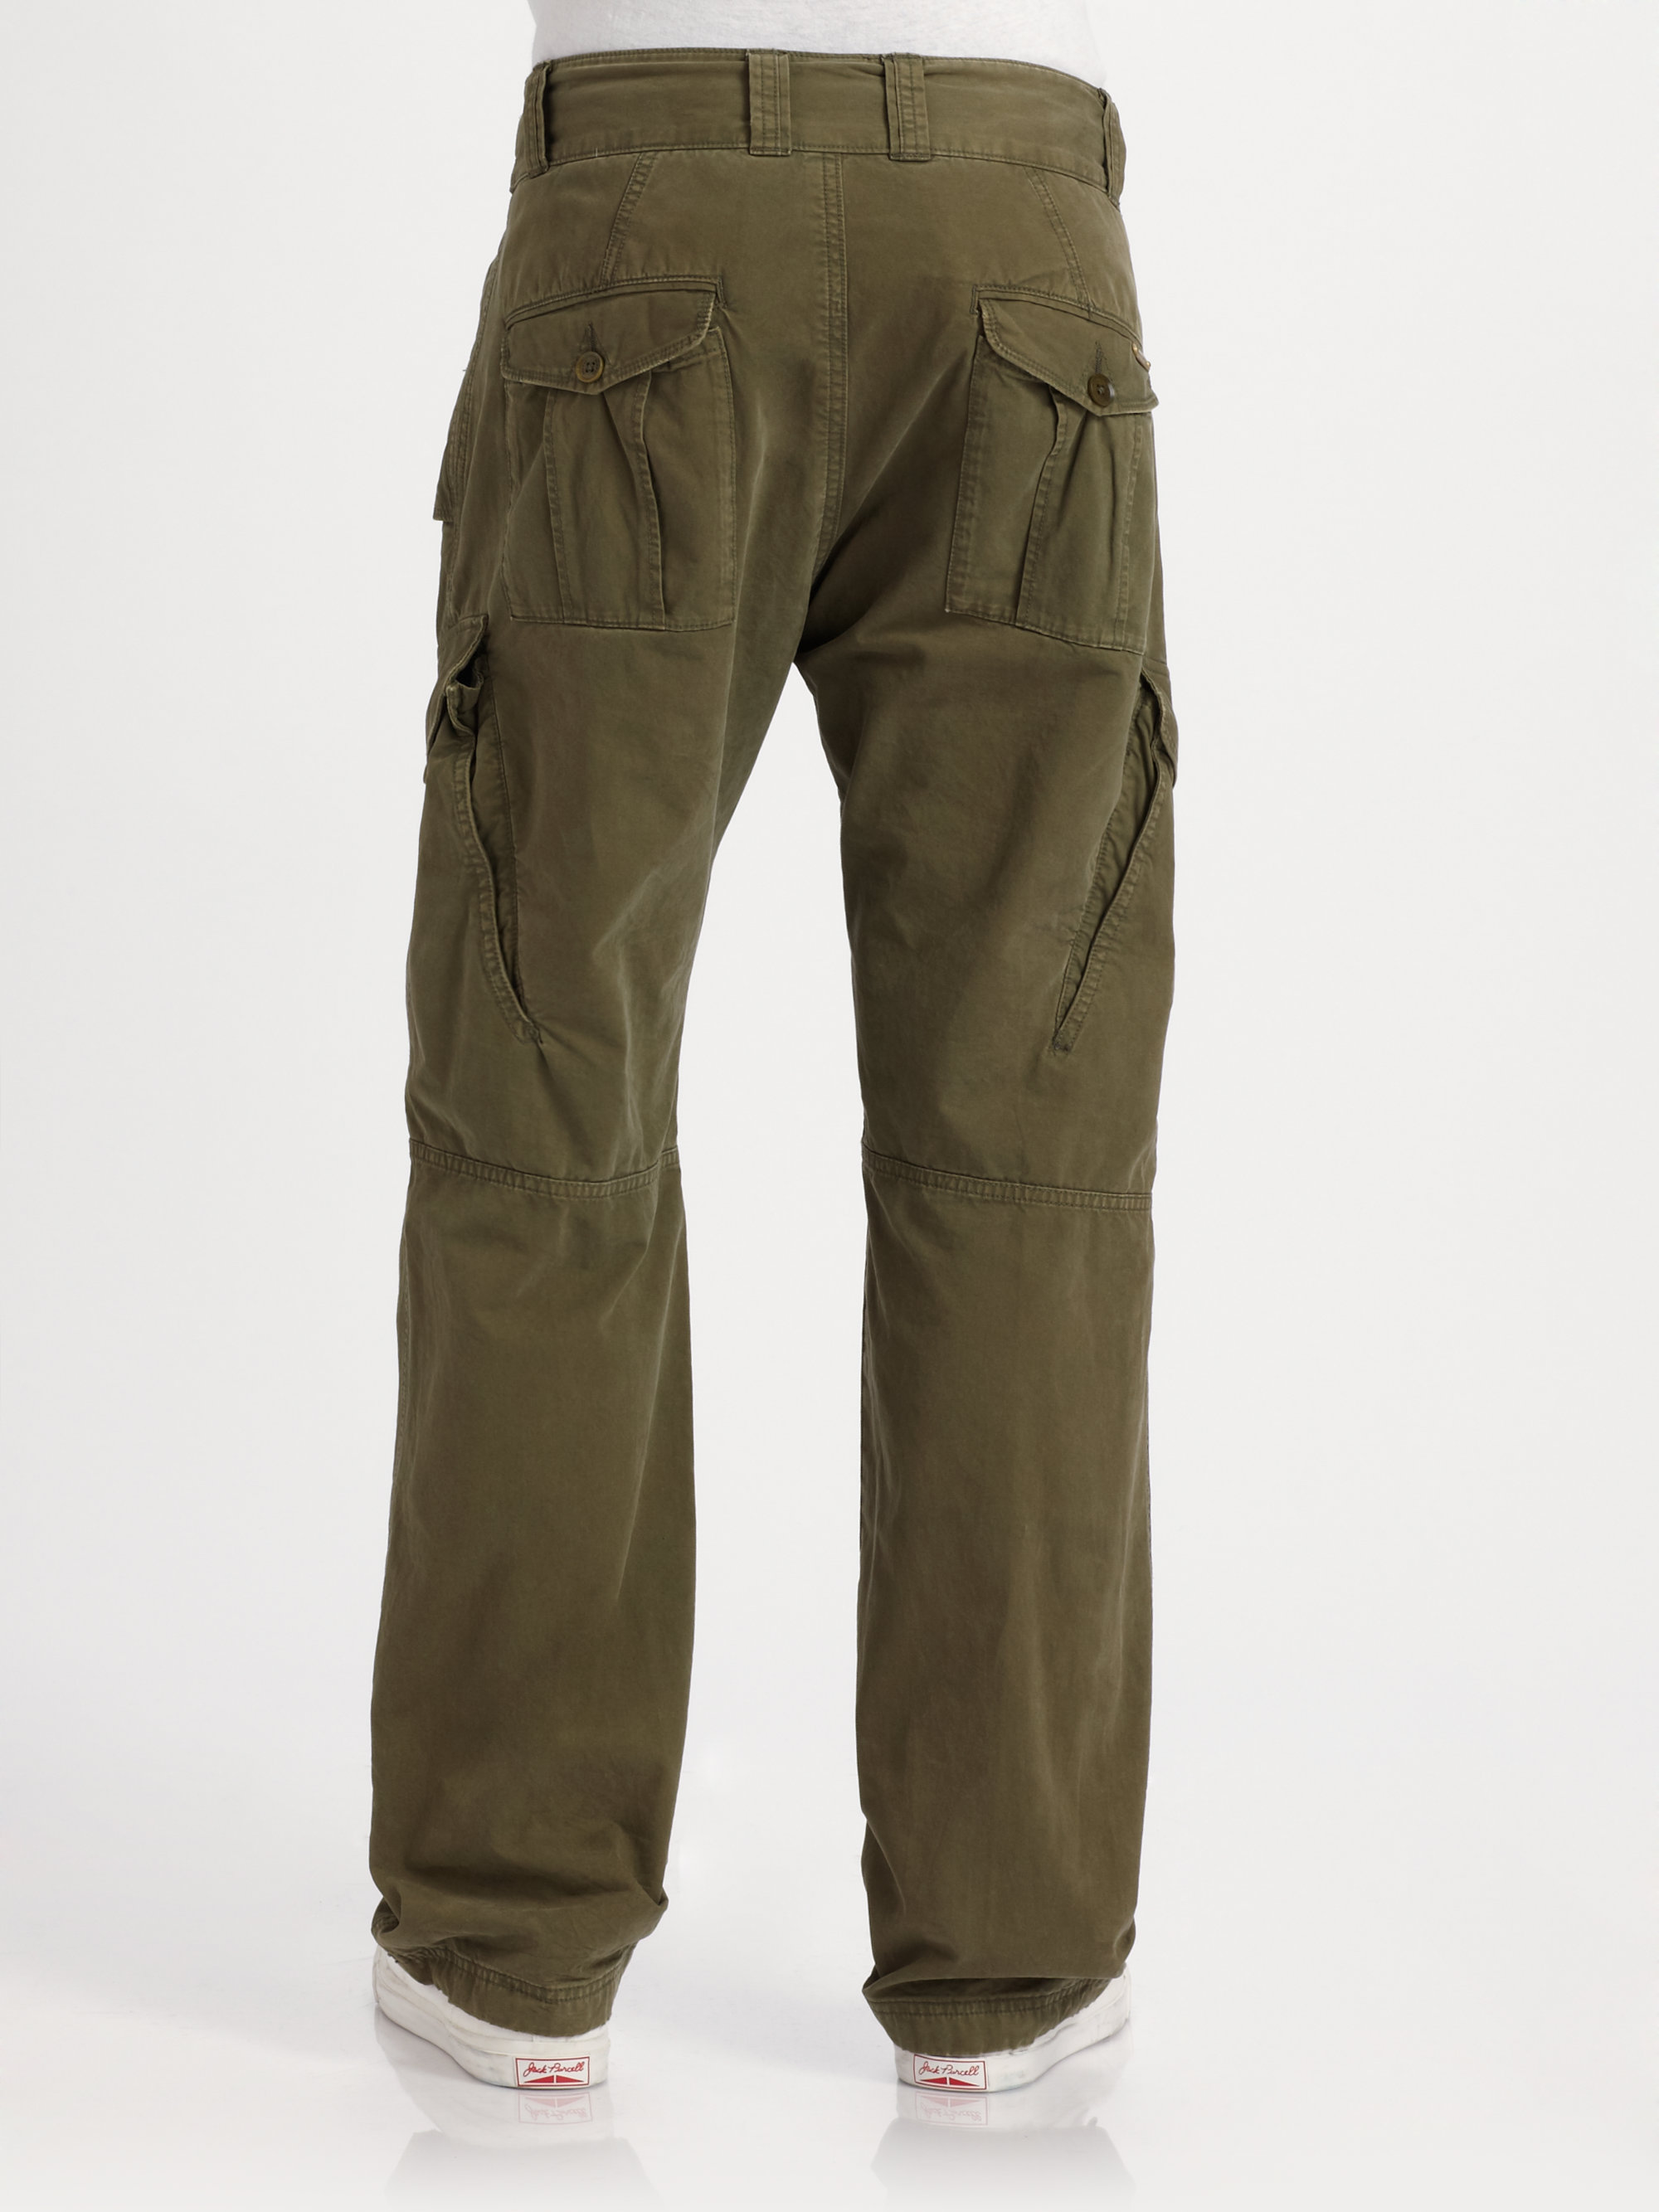 DIESEL Twill Cargo Pants in Army (Natural) for Men - Lyst